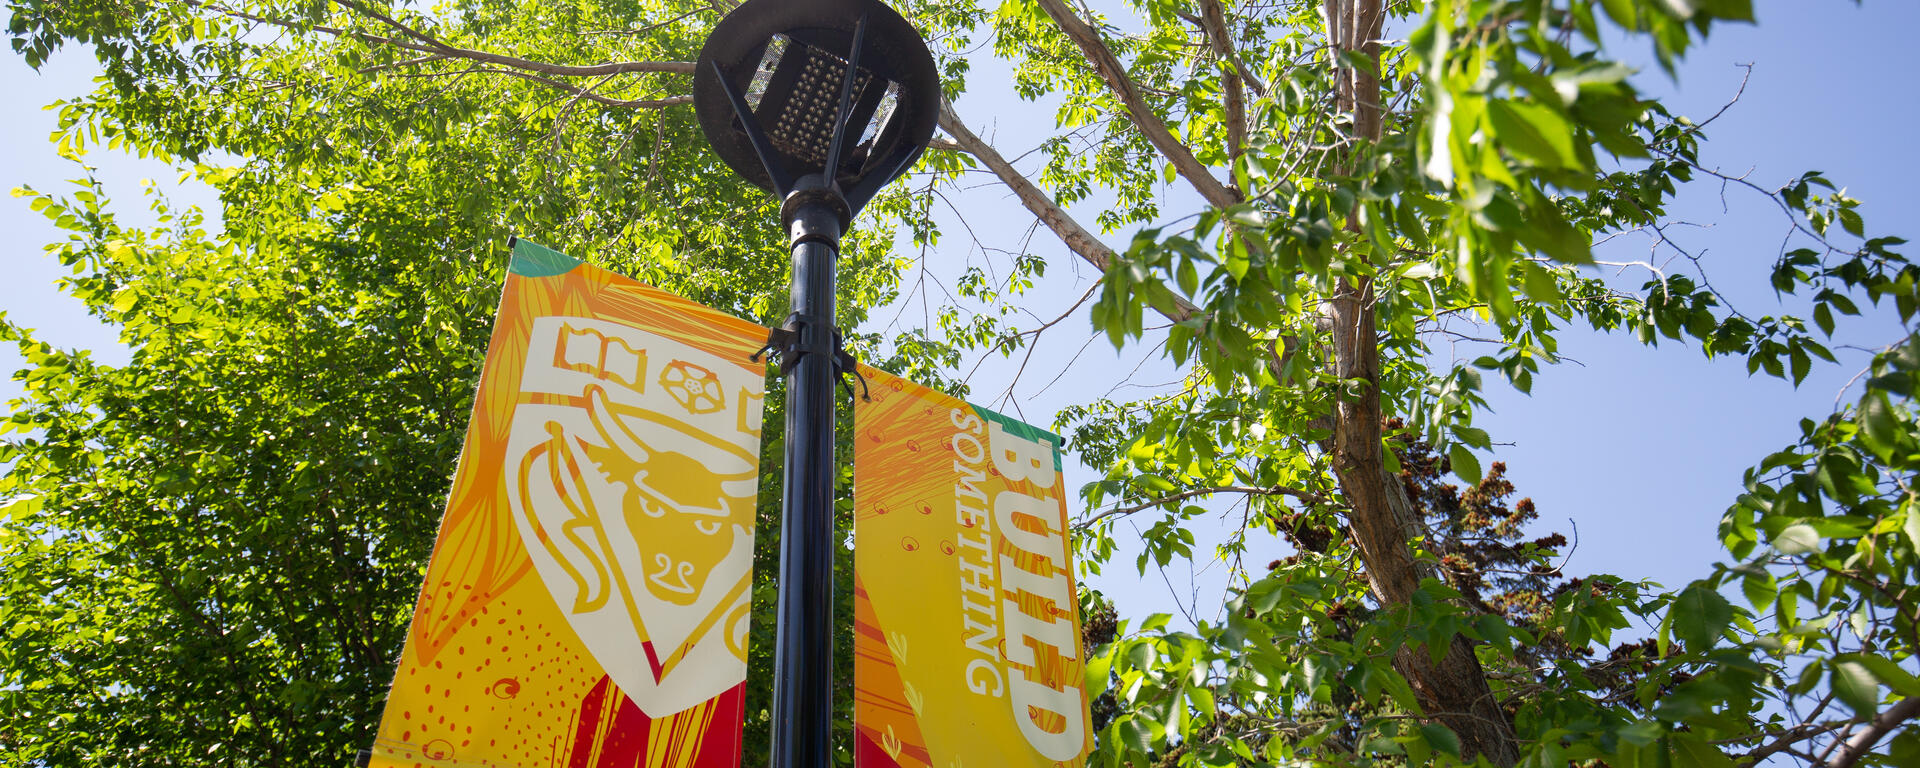 Banners attached to a light pole, amongst the spring foliage on campus.